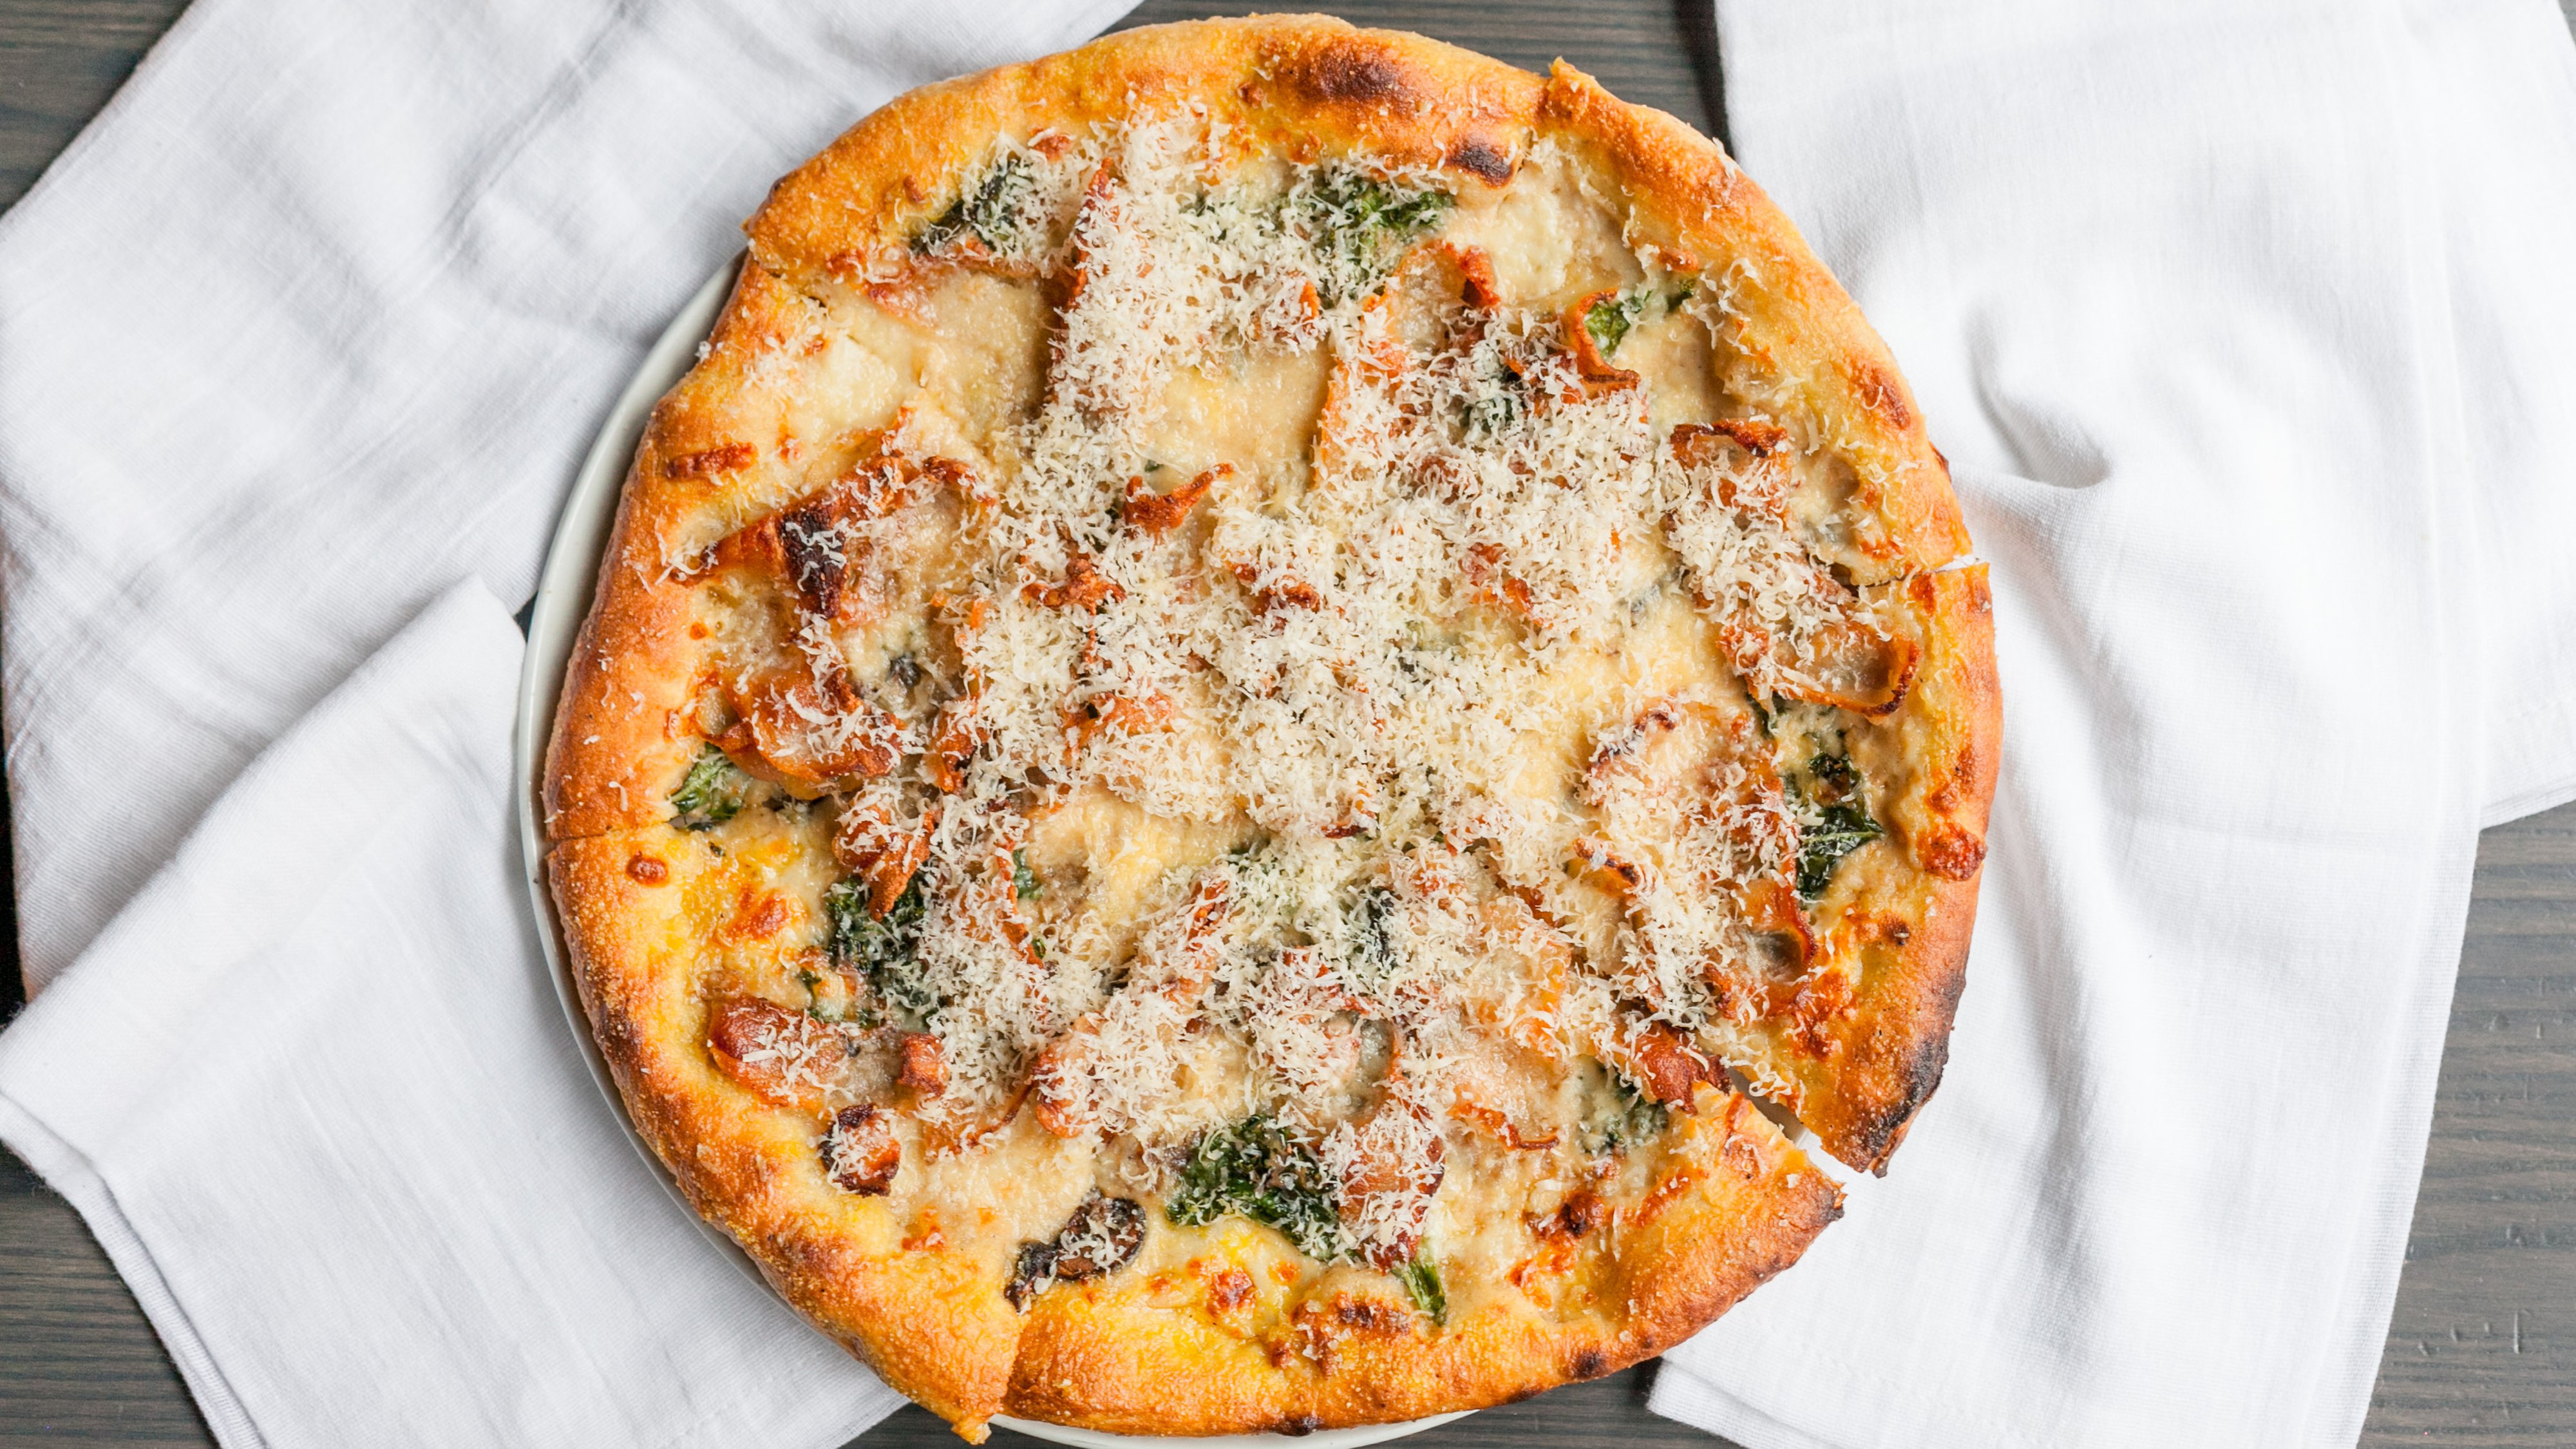 Guanciale and Roasted Truffle Mushroom Pizza